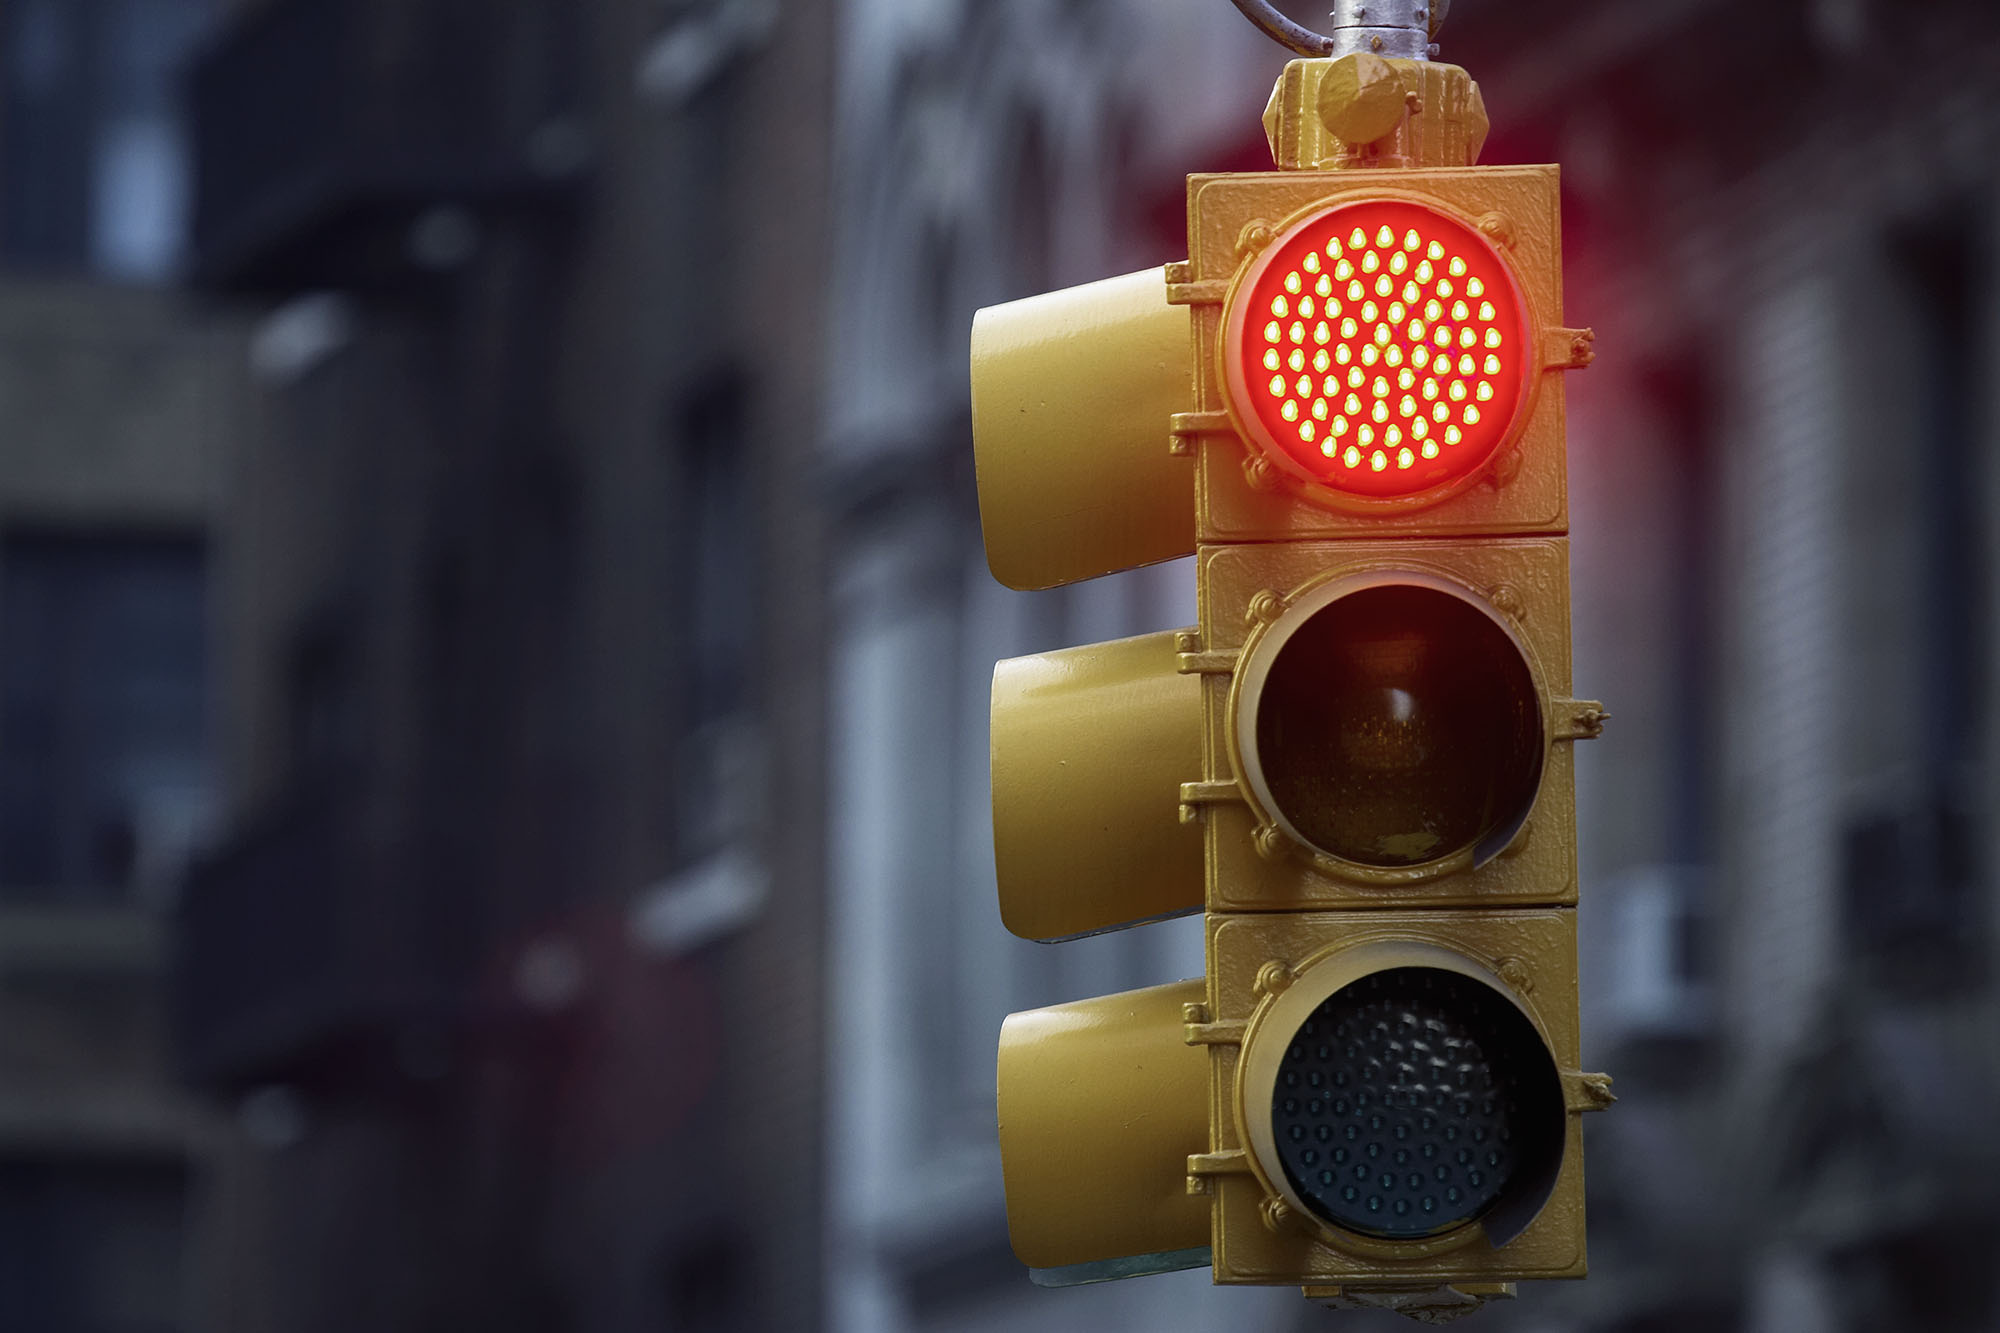 This Red Light Means ‘Go’ for Medical Discoveries